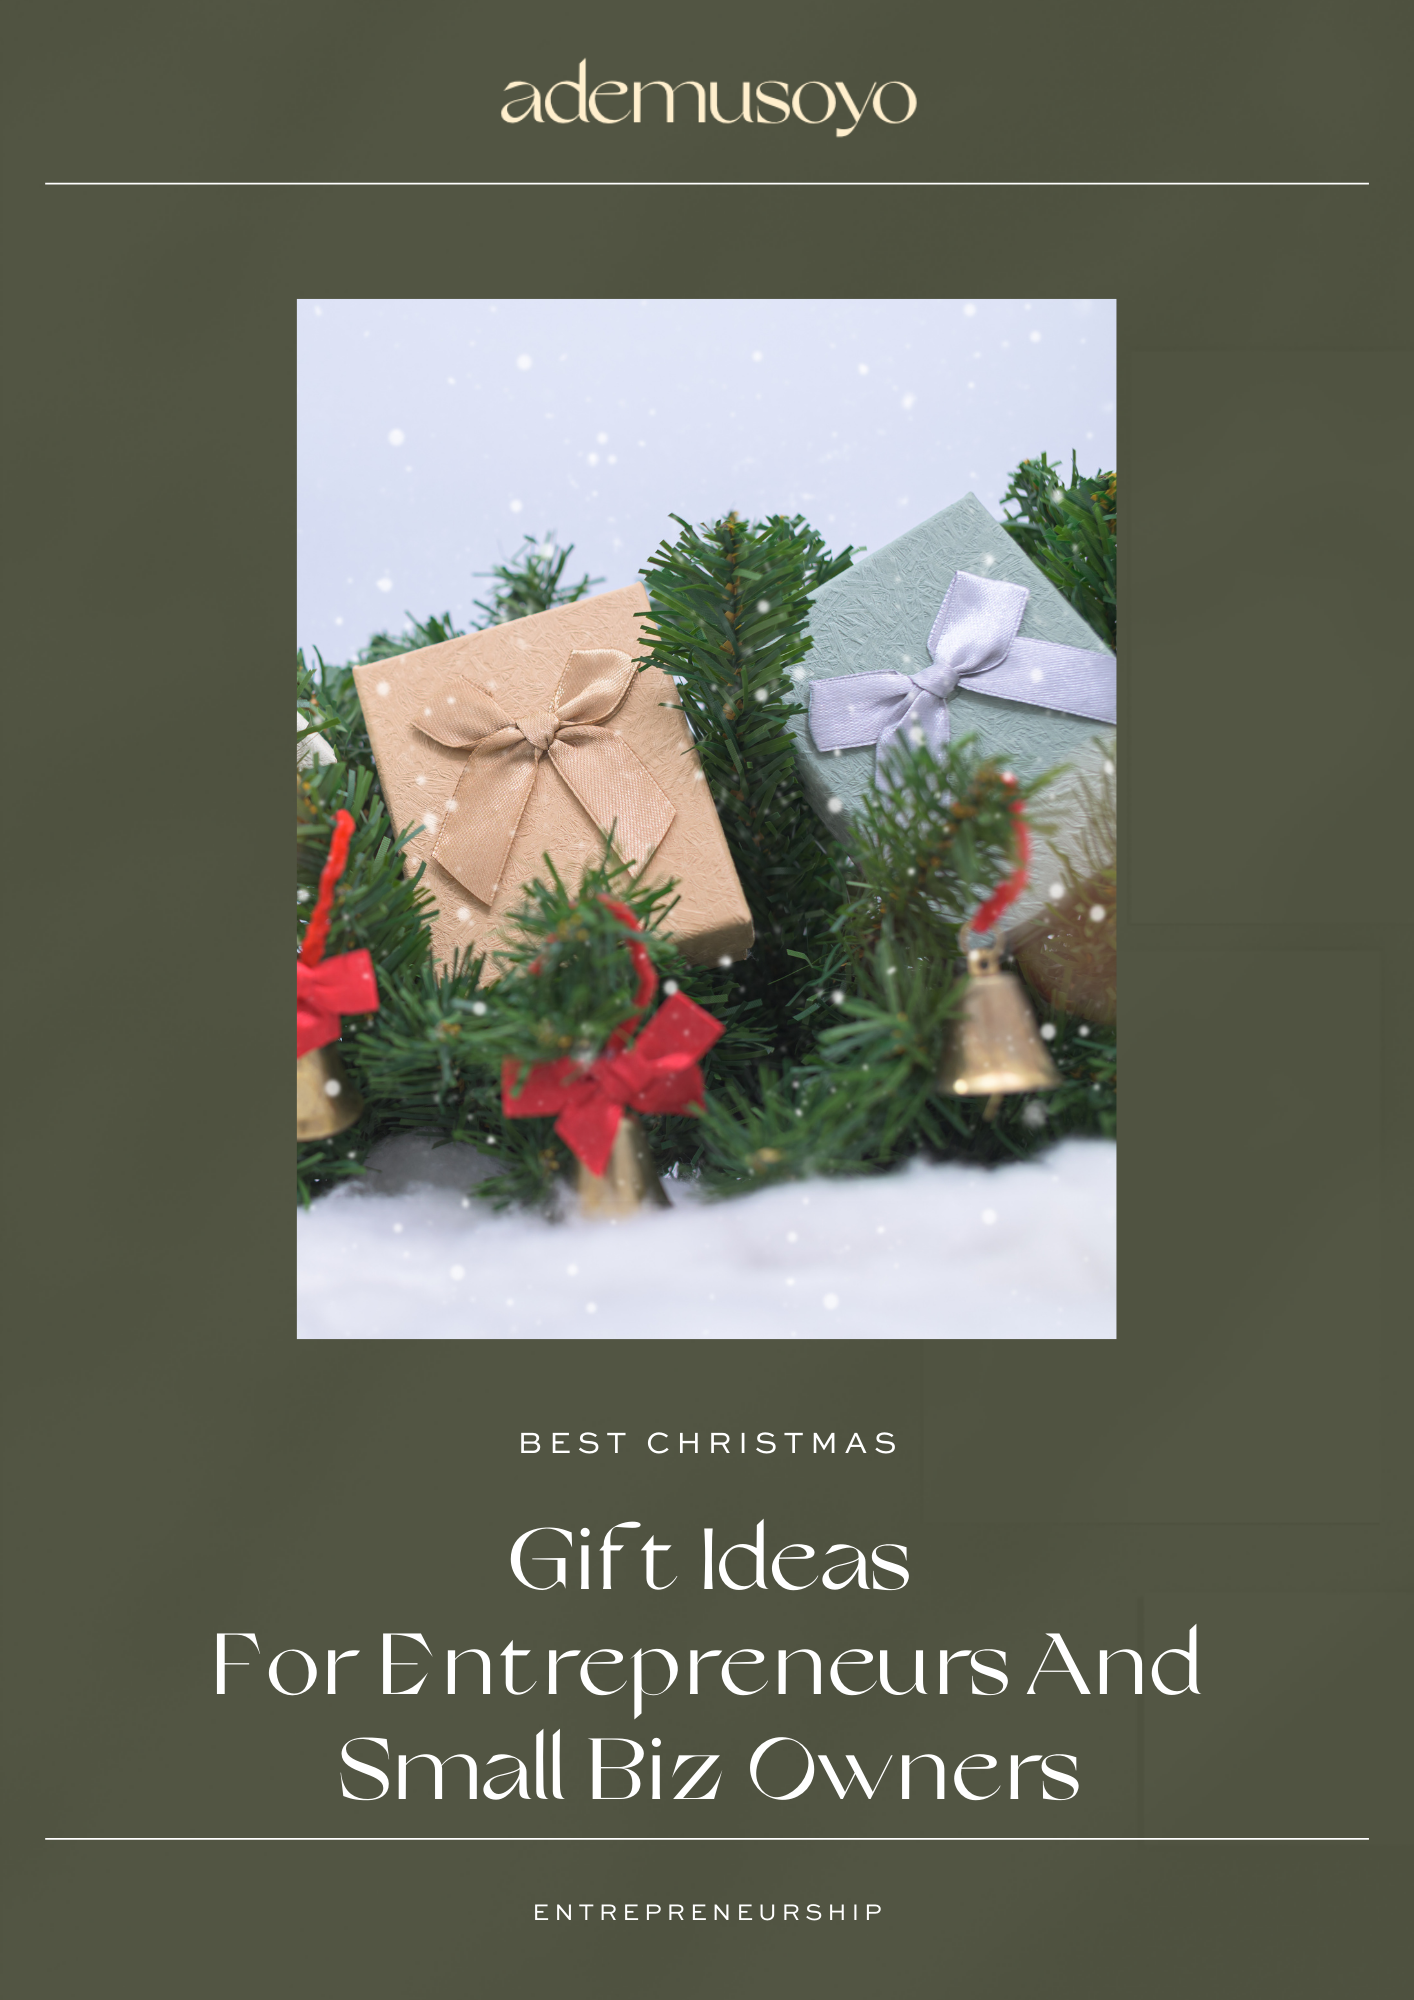 blog cover image for a blog post best christmas gift ideas for entrepreneurs and small biz owners